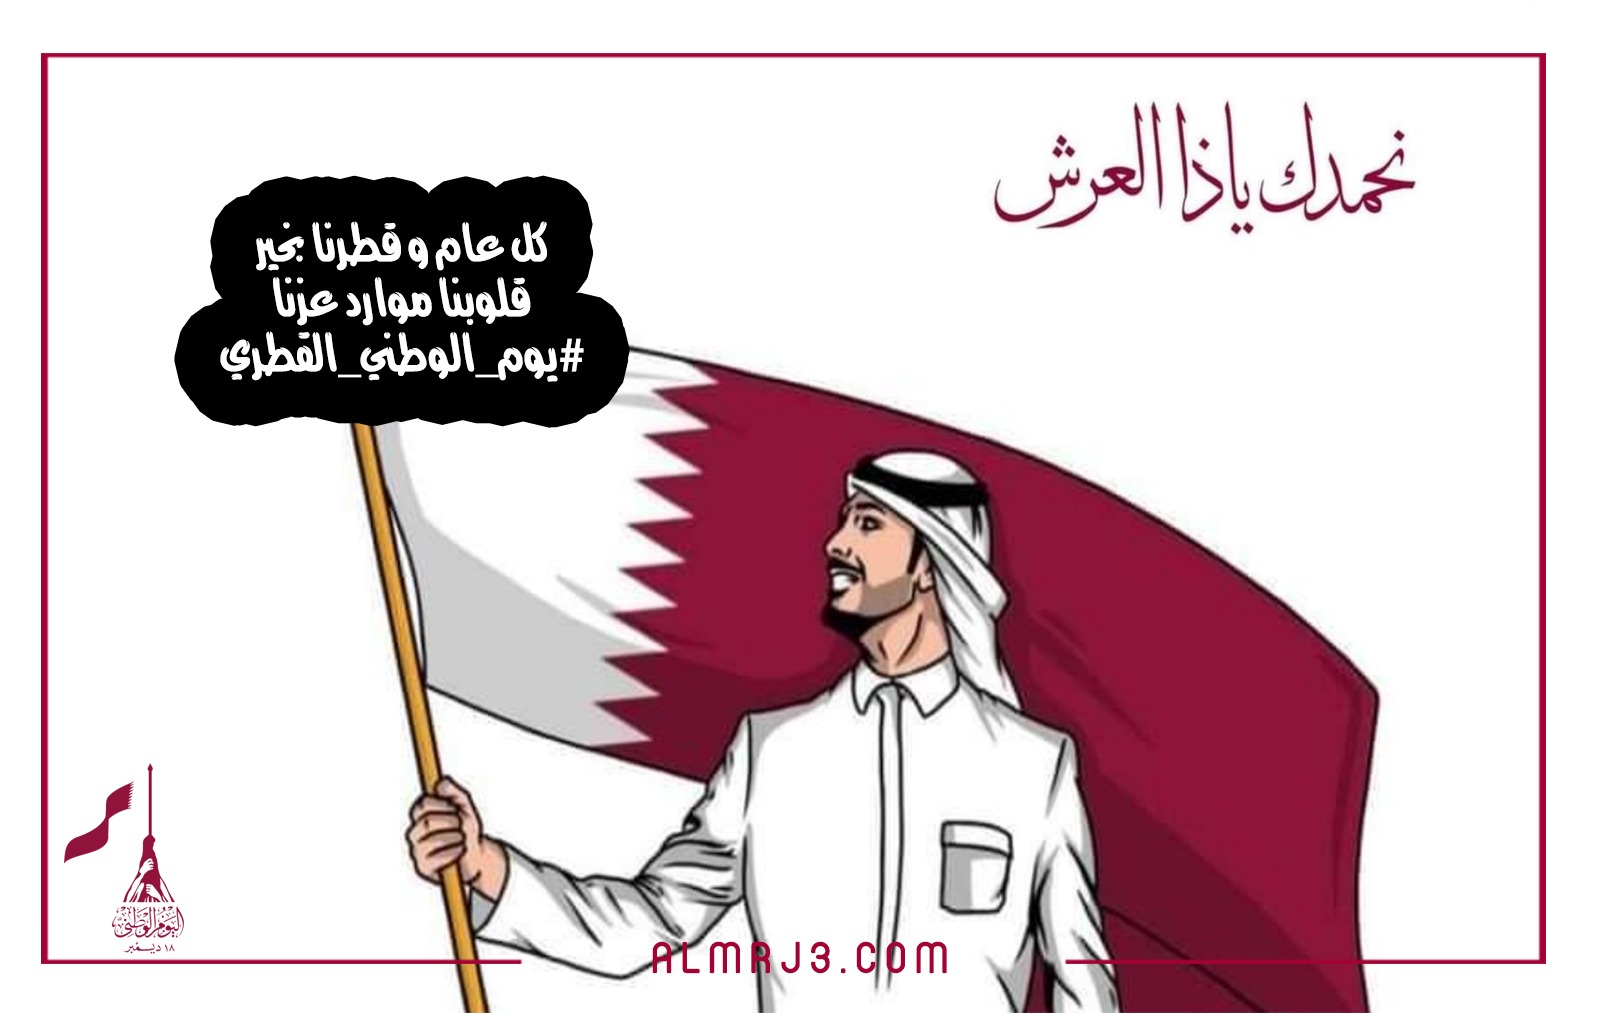 Talking about Qatar National Day with pictures